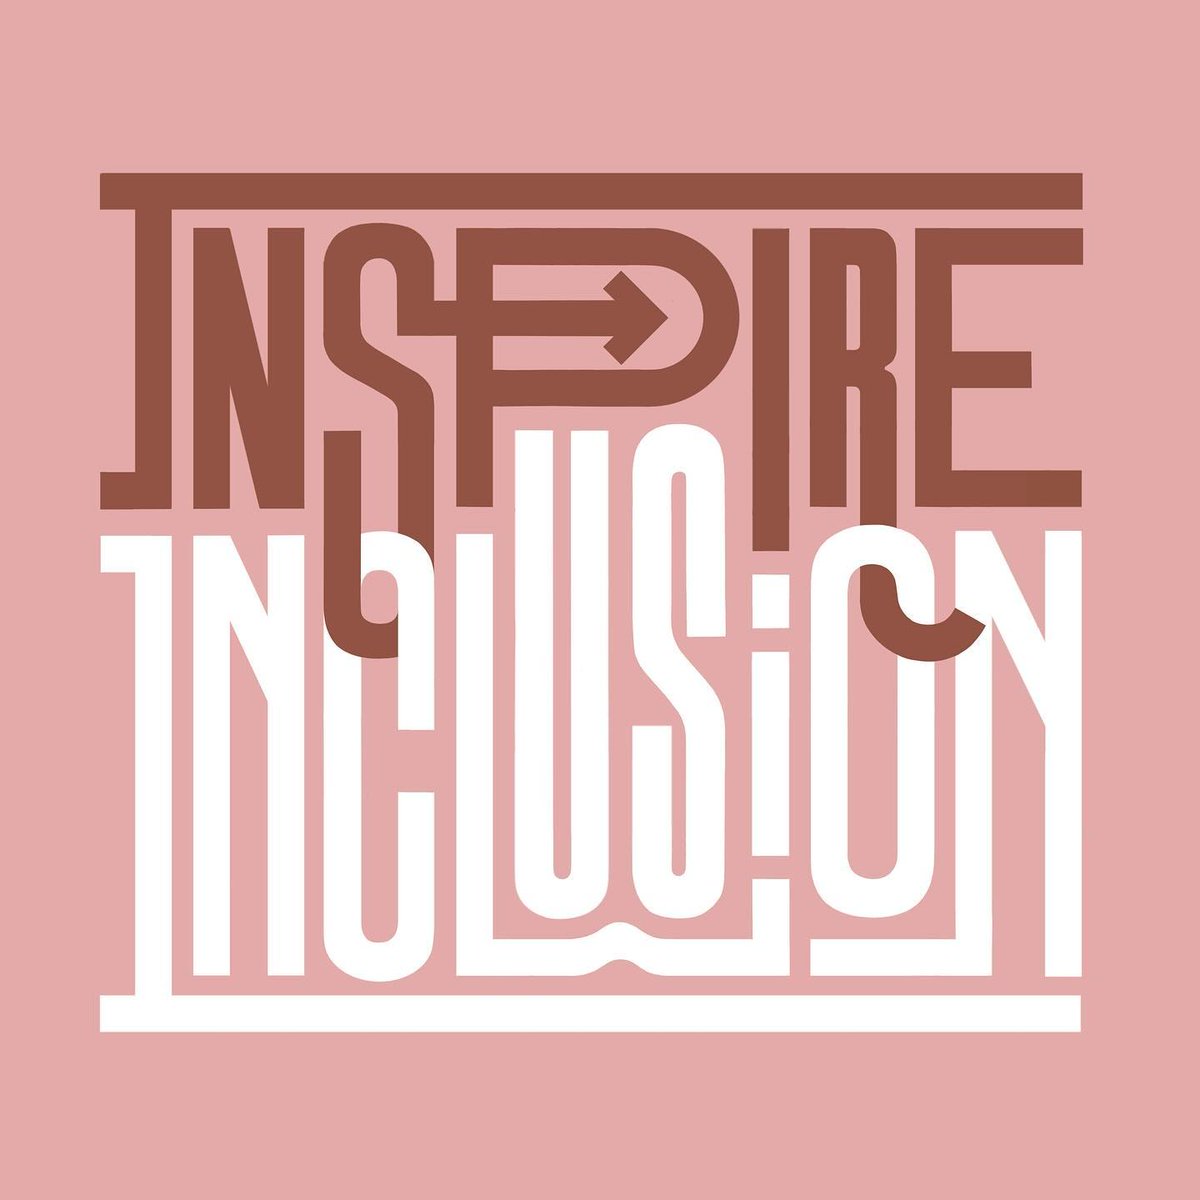 #IWD2024 saw male allies step forward to support #womensequality💁🏾‍♂️ like #London based 🇬🇧 #lettering #artist & #designer Ollie Cooper who participated in #IWDtypism challenge by creating an impactful #design promoting the #InspireInclusion campaign theme 🎨 Great work, Ollie! #IWD